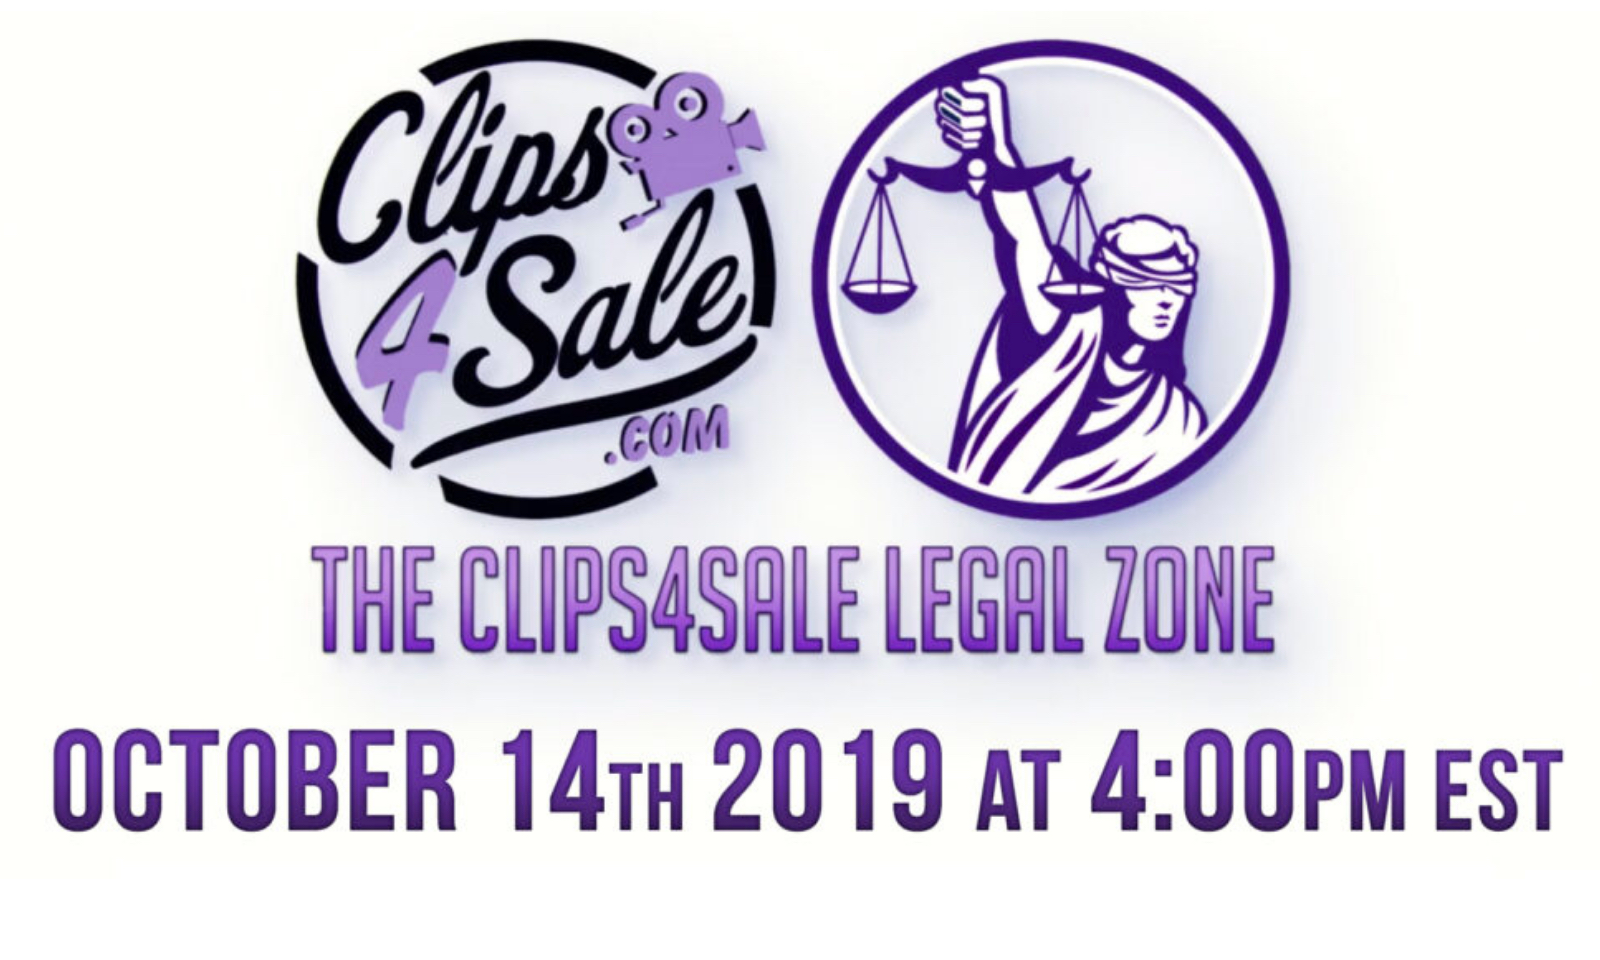 Clips4Sale Welcomes All to the Legal Zone